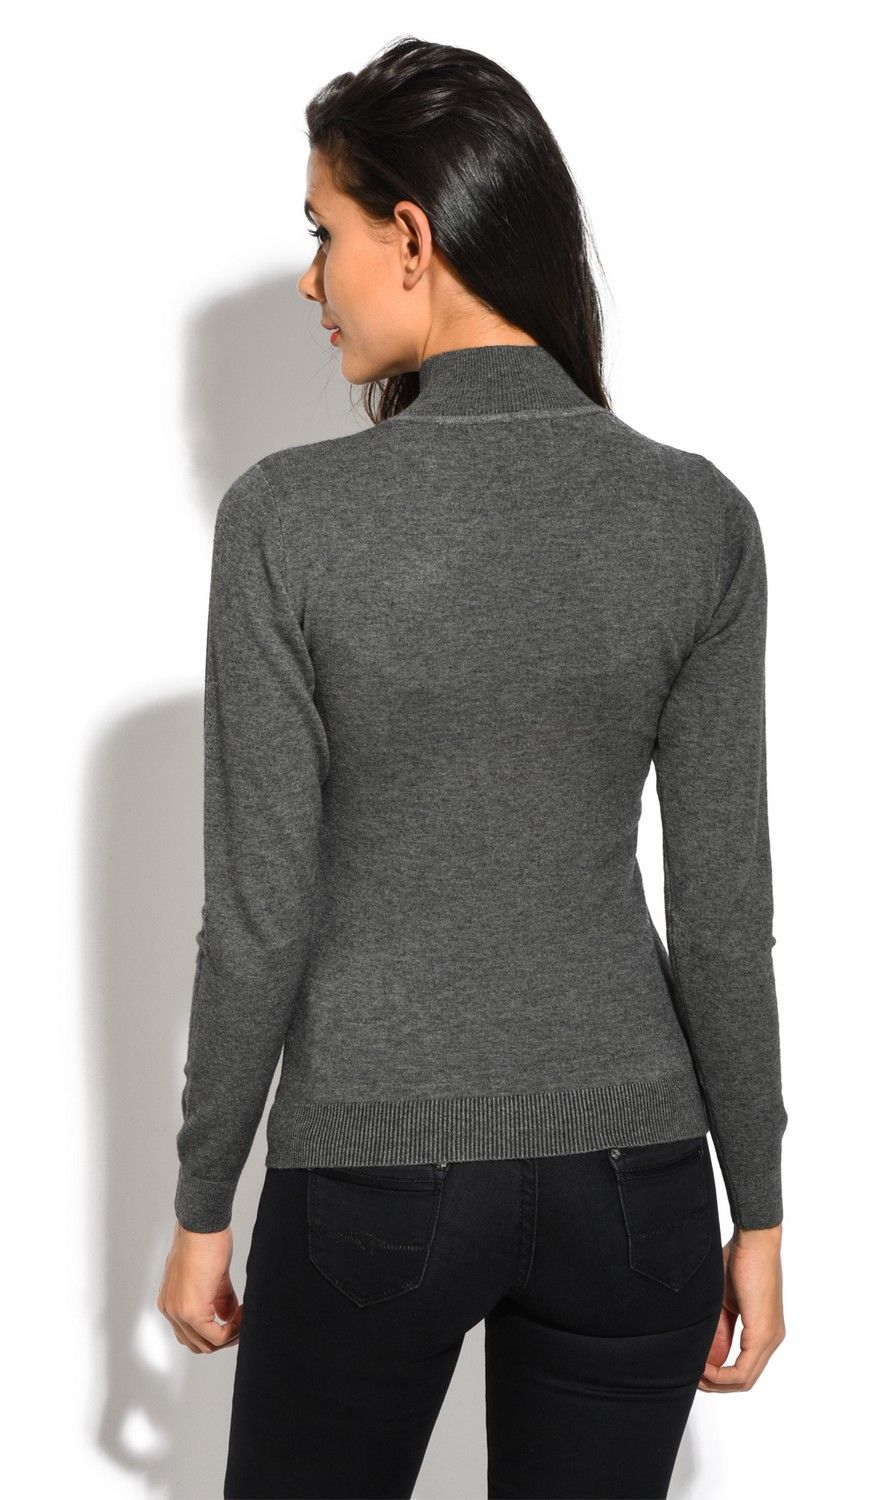 William De Faye Funnel Neck Long Sleeve Sweater in Grey. 40% Cashmere 45% Viscose 15% Elastane. 30 degrees wash, do not bleach, do not tumble dry, low iron